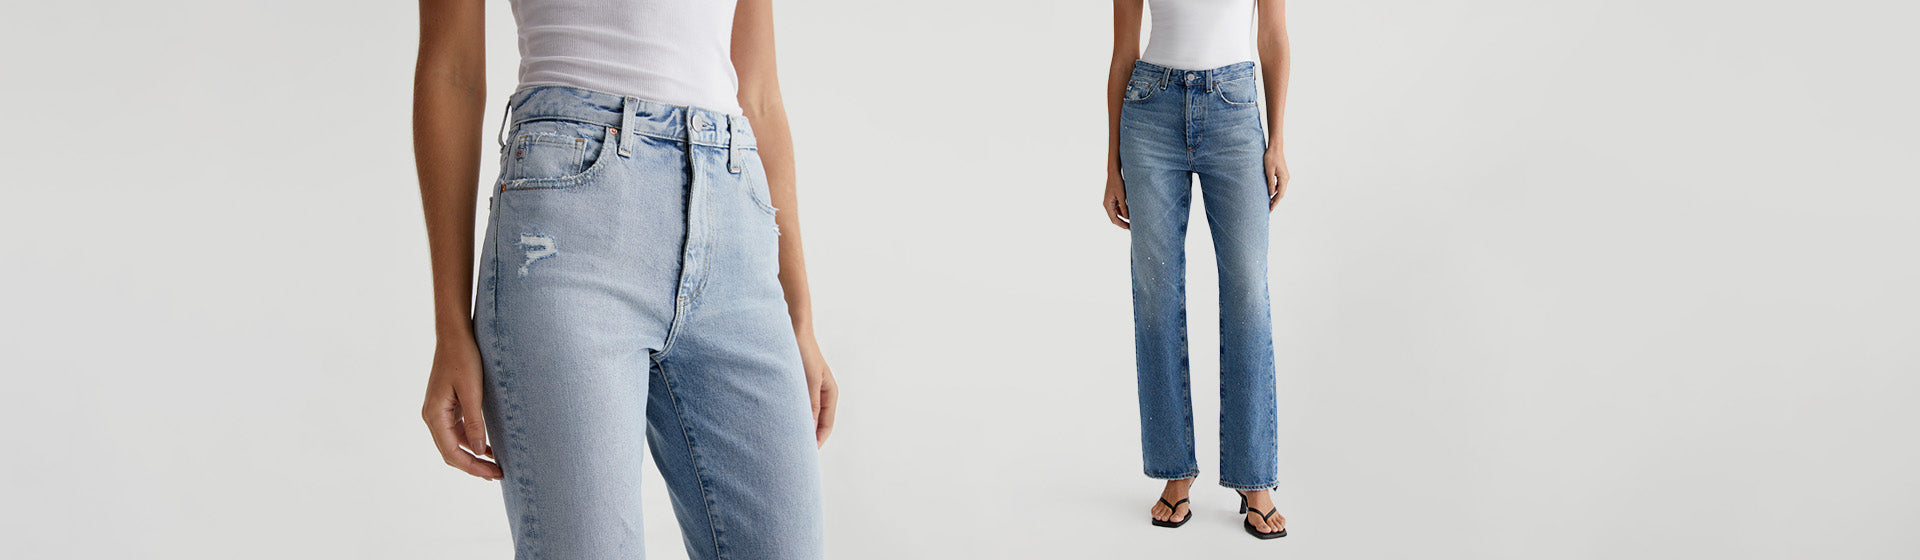 Women's Ultra High-Rise Jeans and Pants